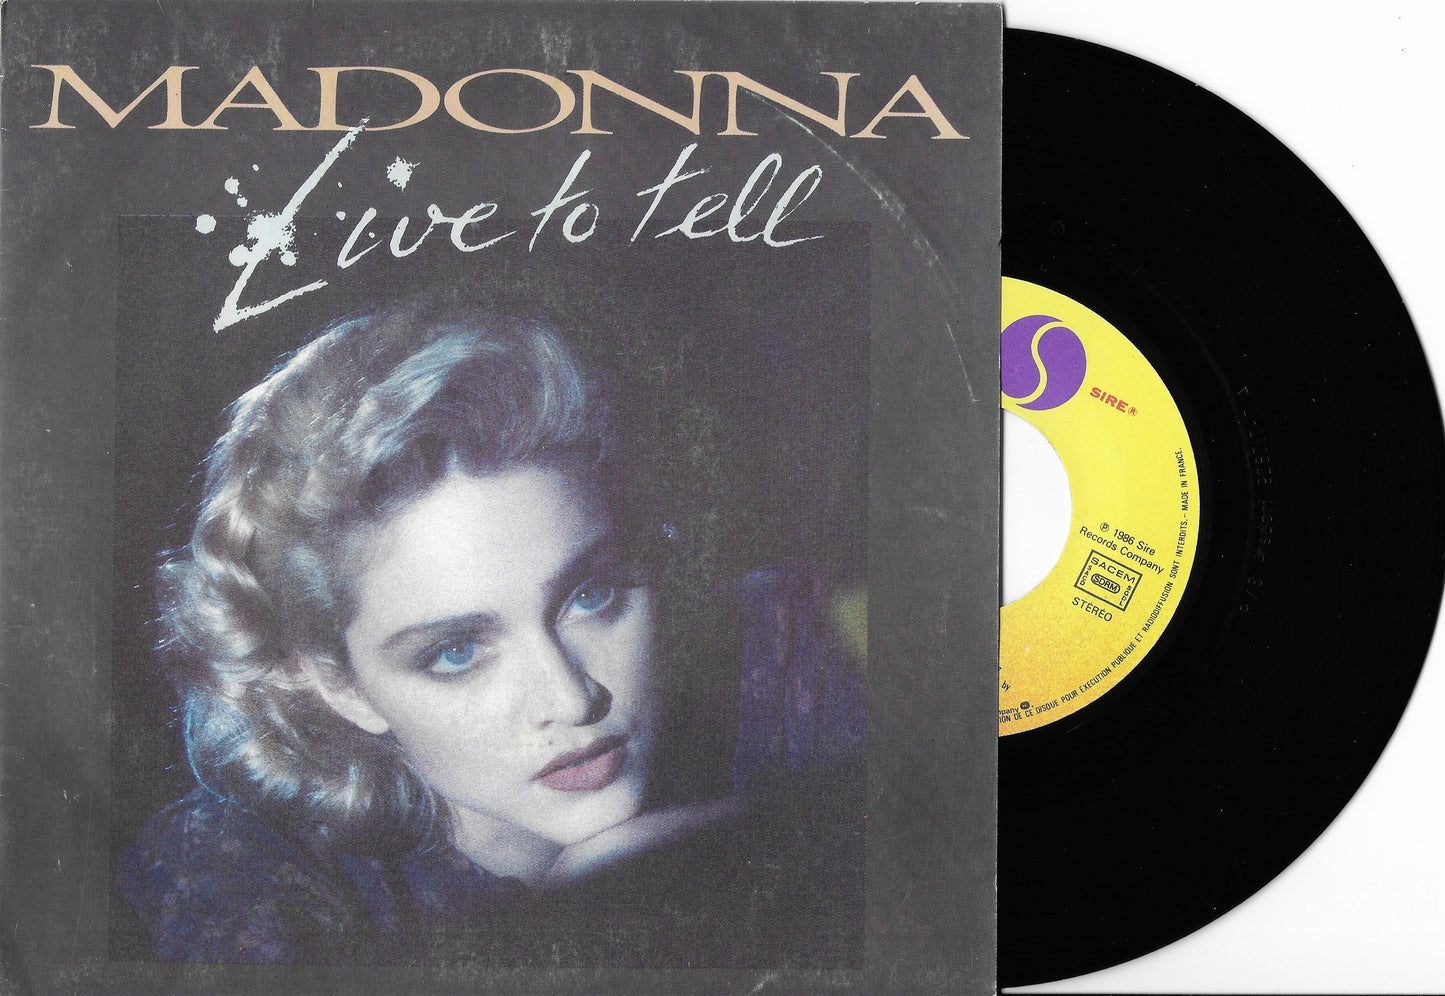 MADONNA - Live To Tell